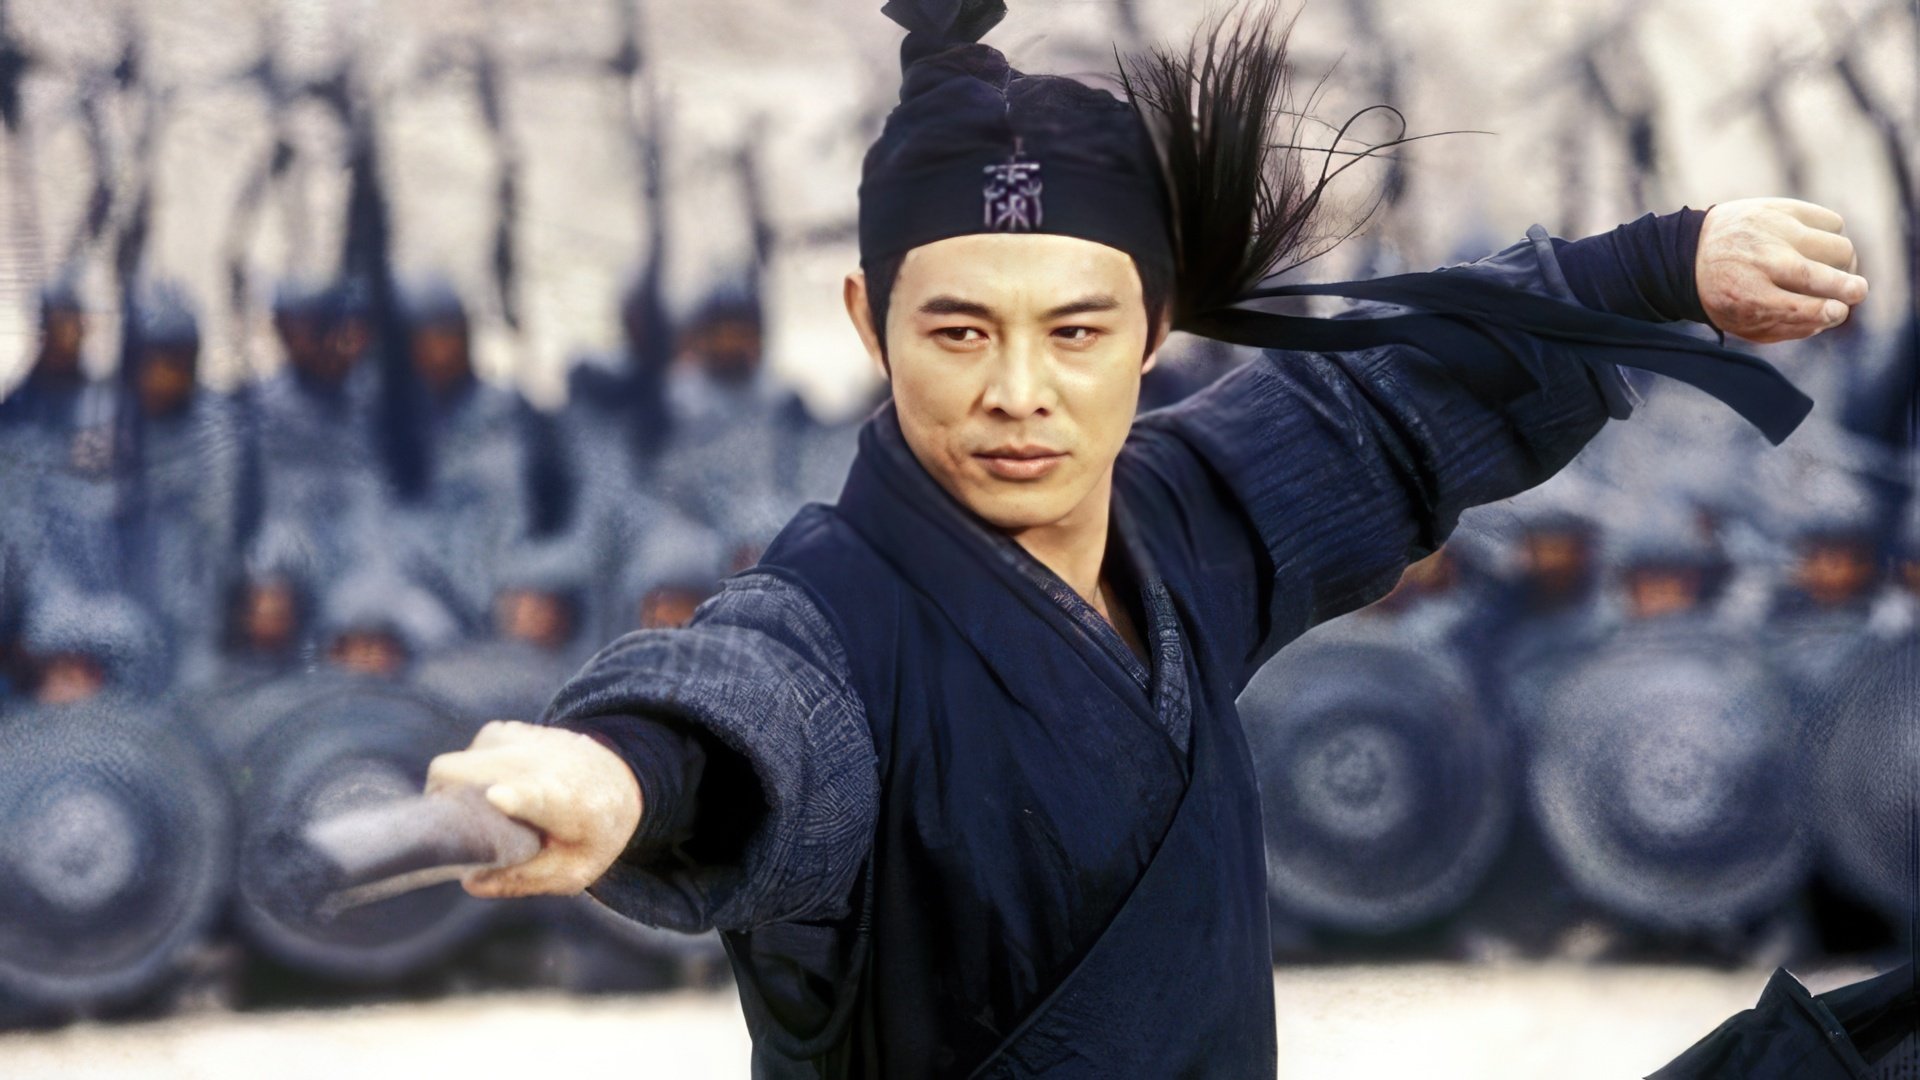 Jet Li started his own fitness program, containing elements of wushu, yoga, and pilates.